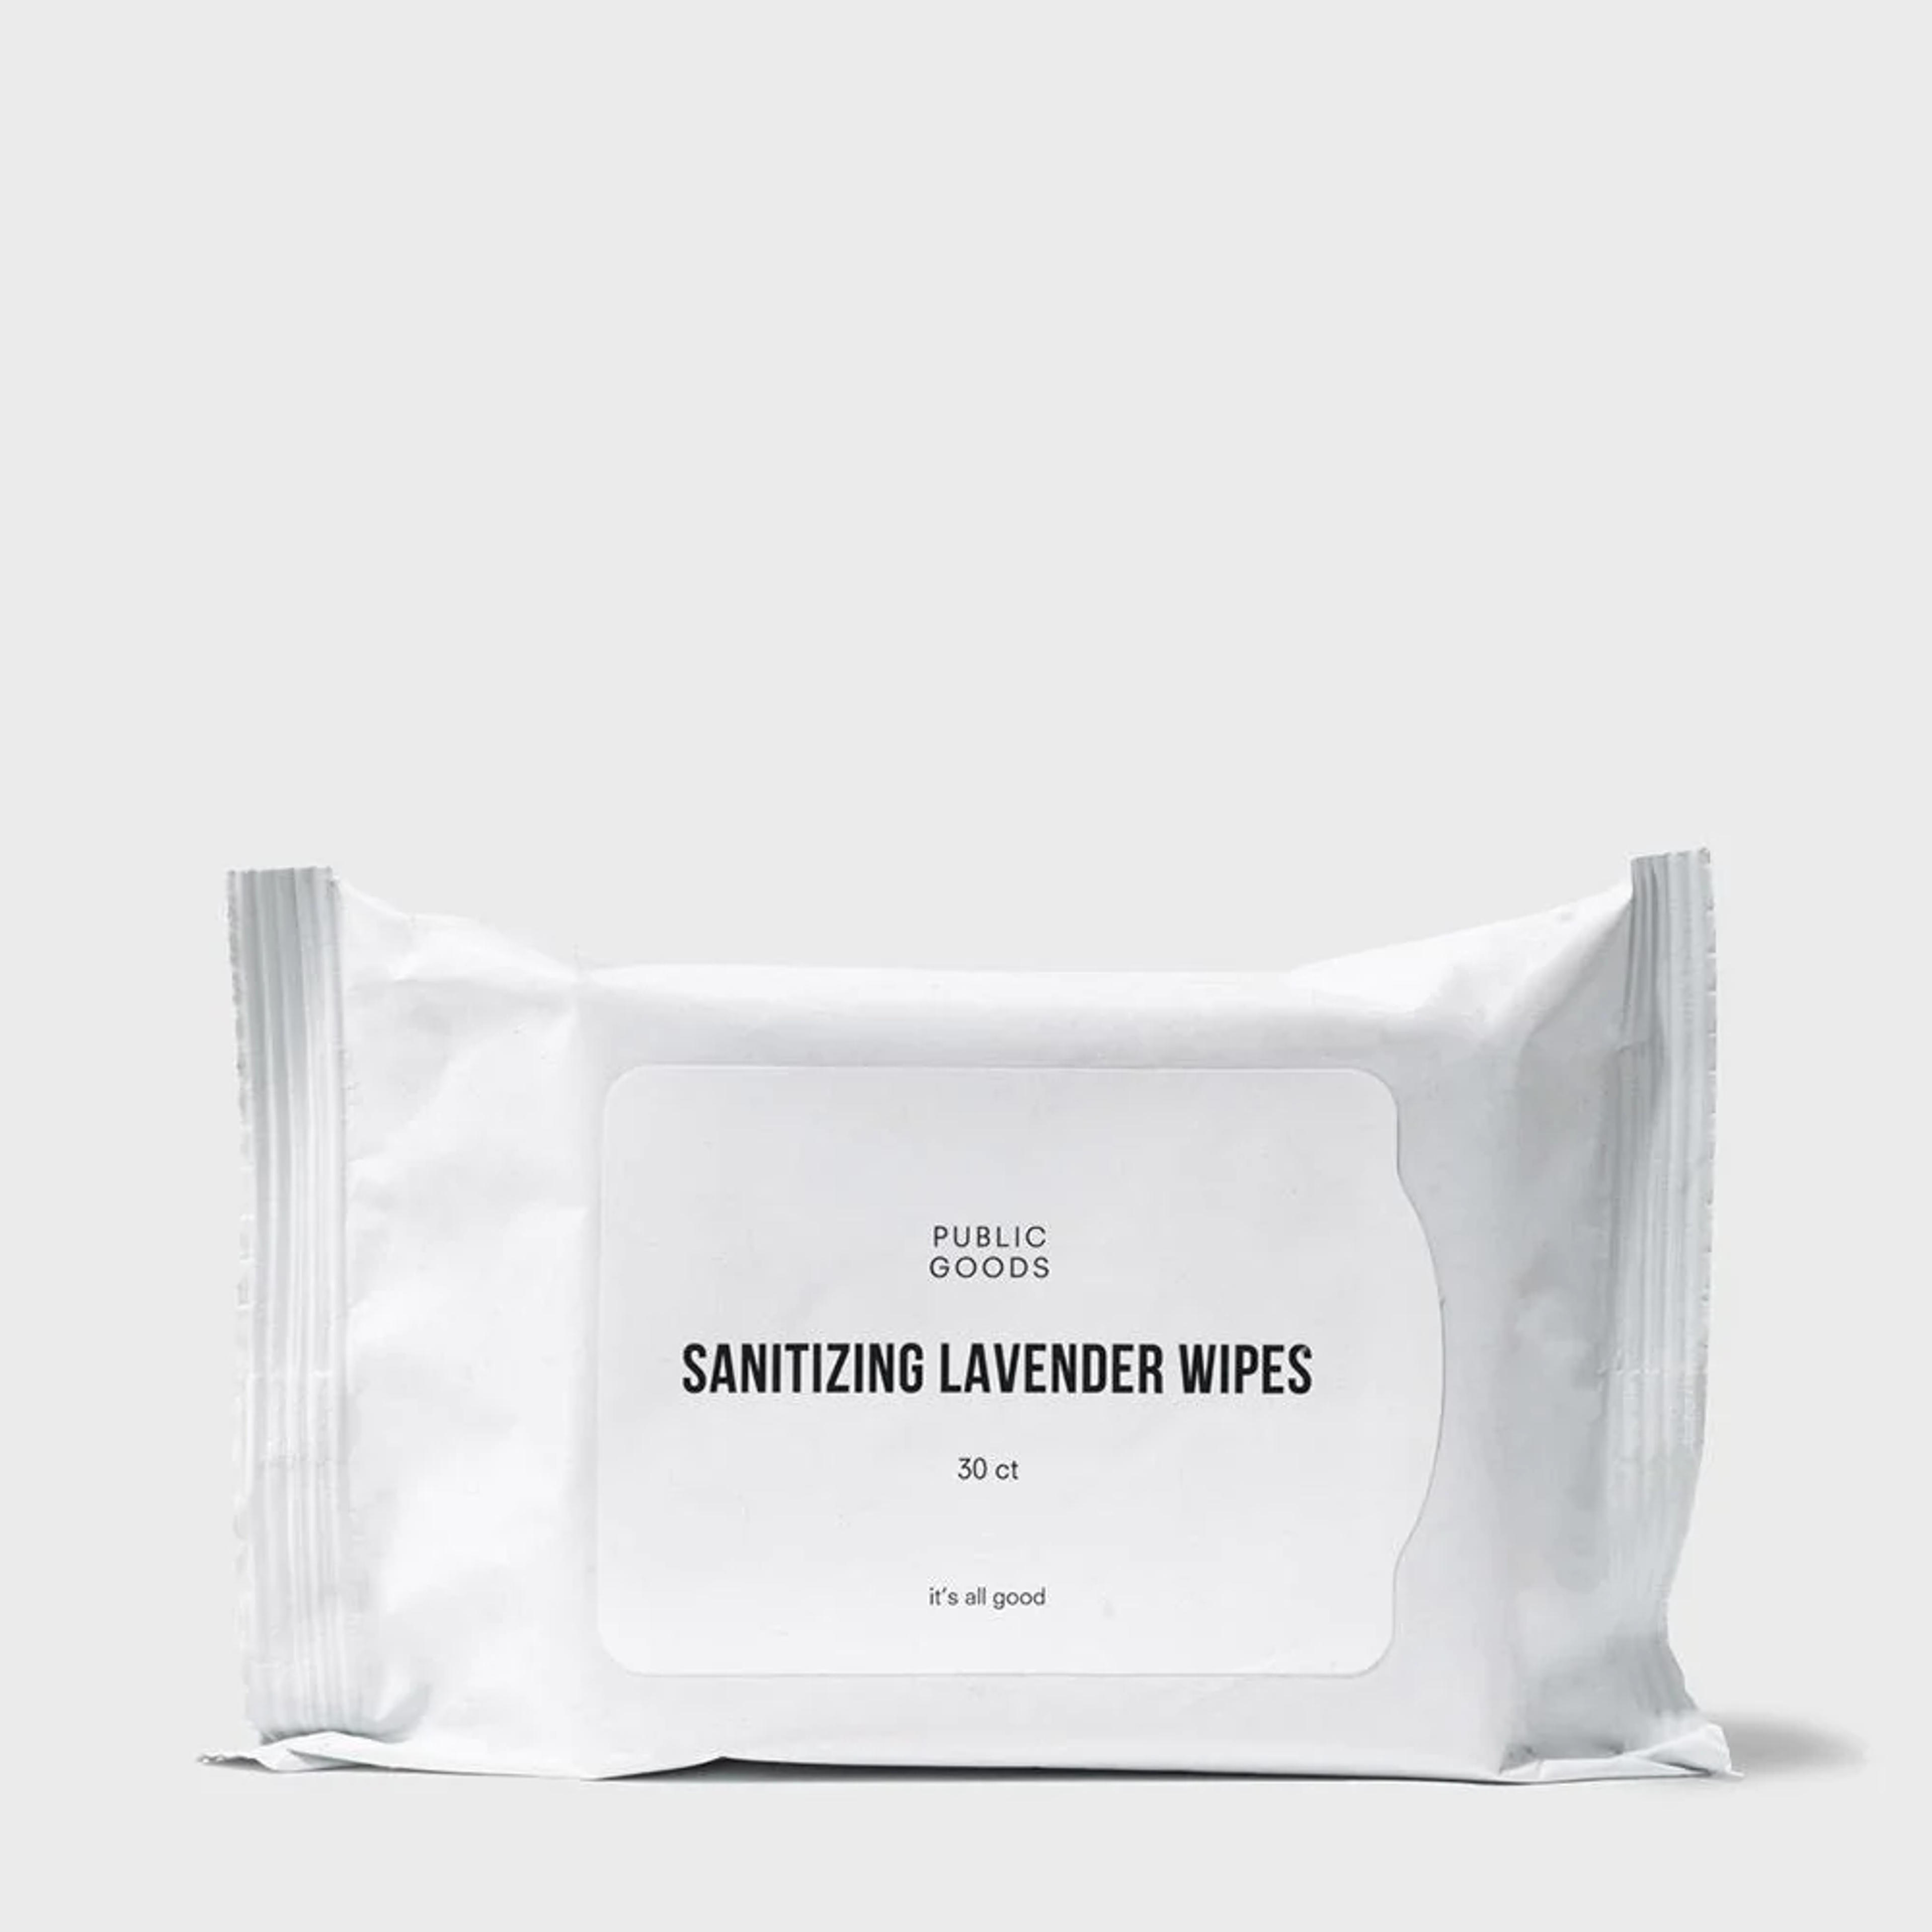 FREE Sanitizing Lavender Wipes (30 ct) Giveaway - 30 ct (100% off)